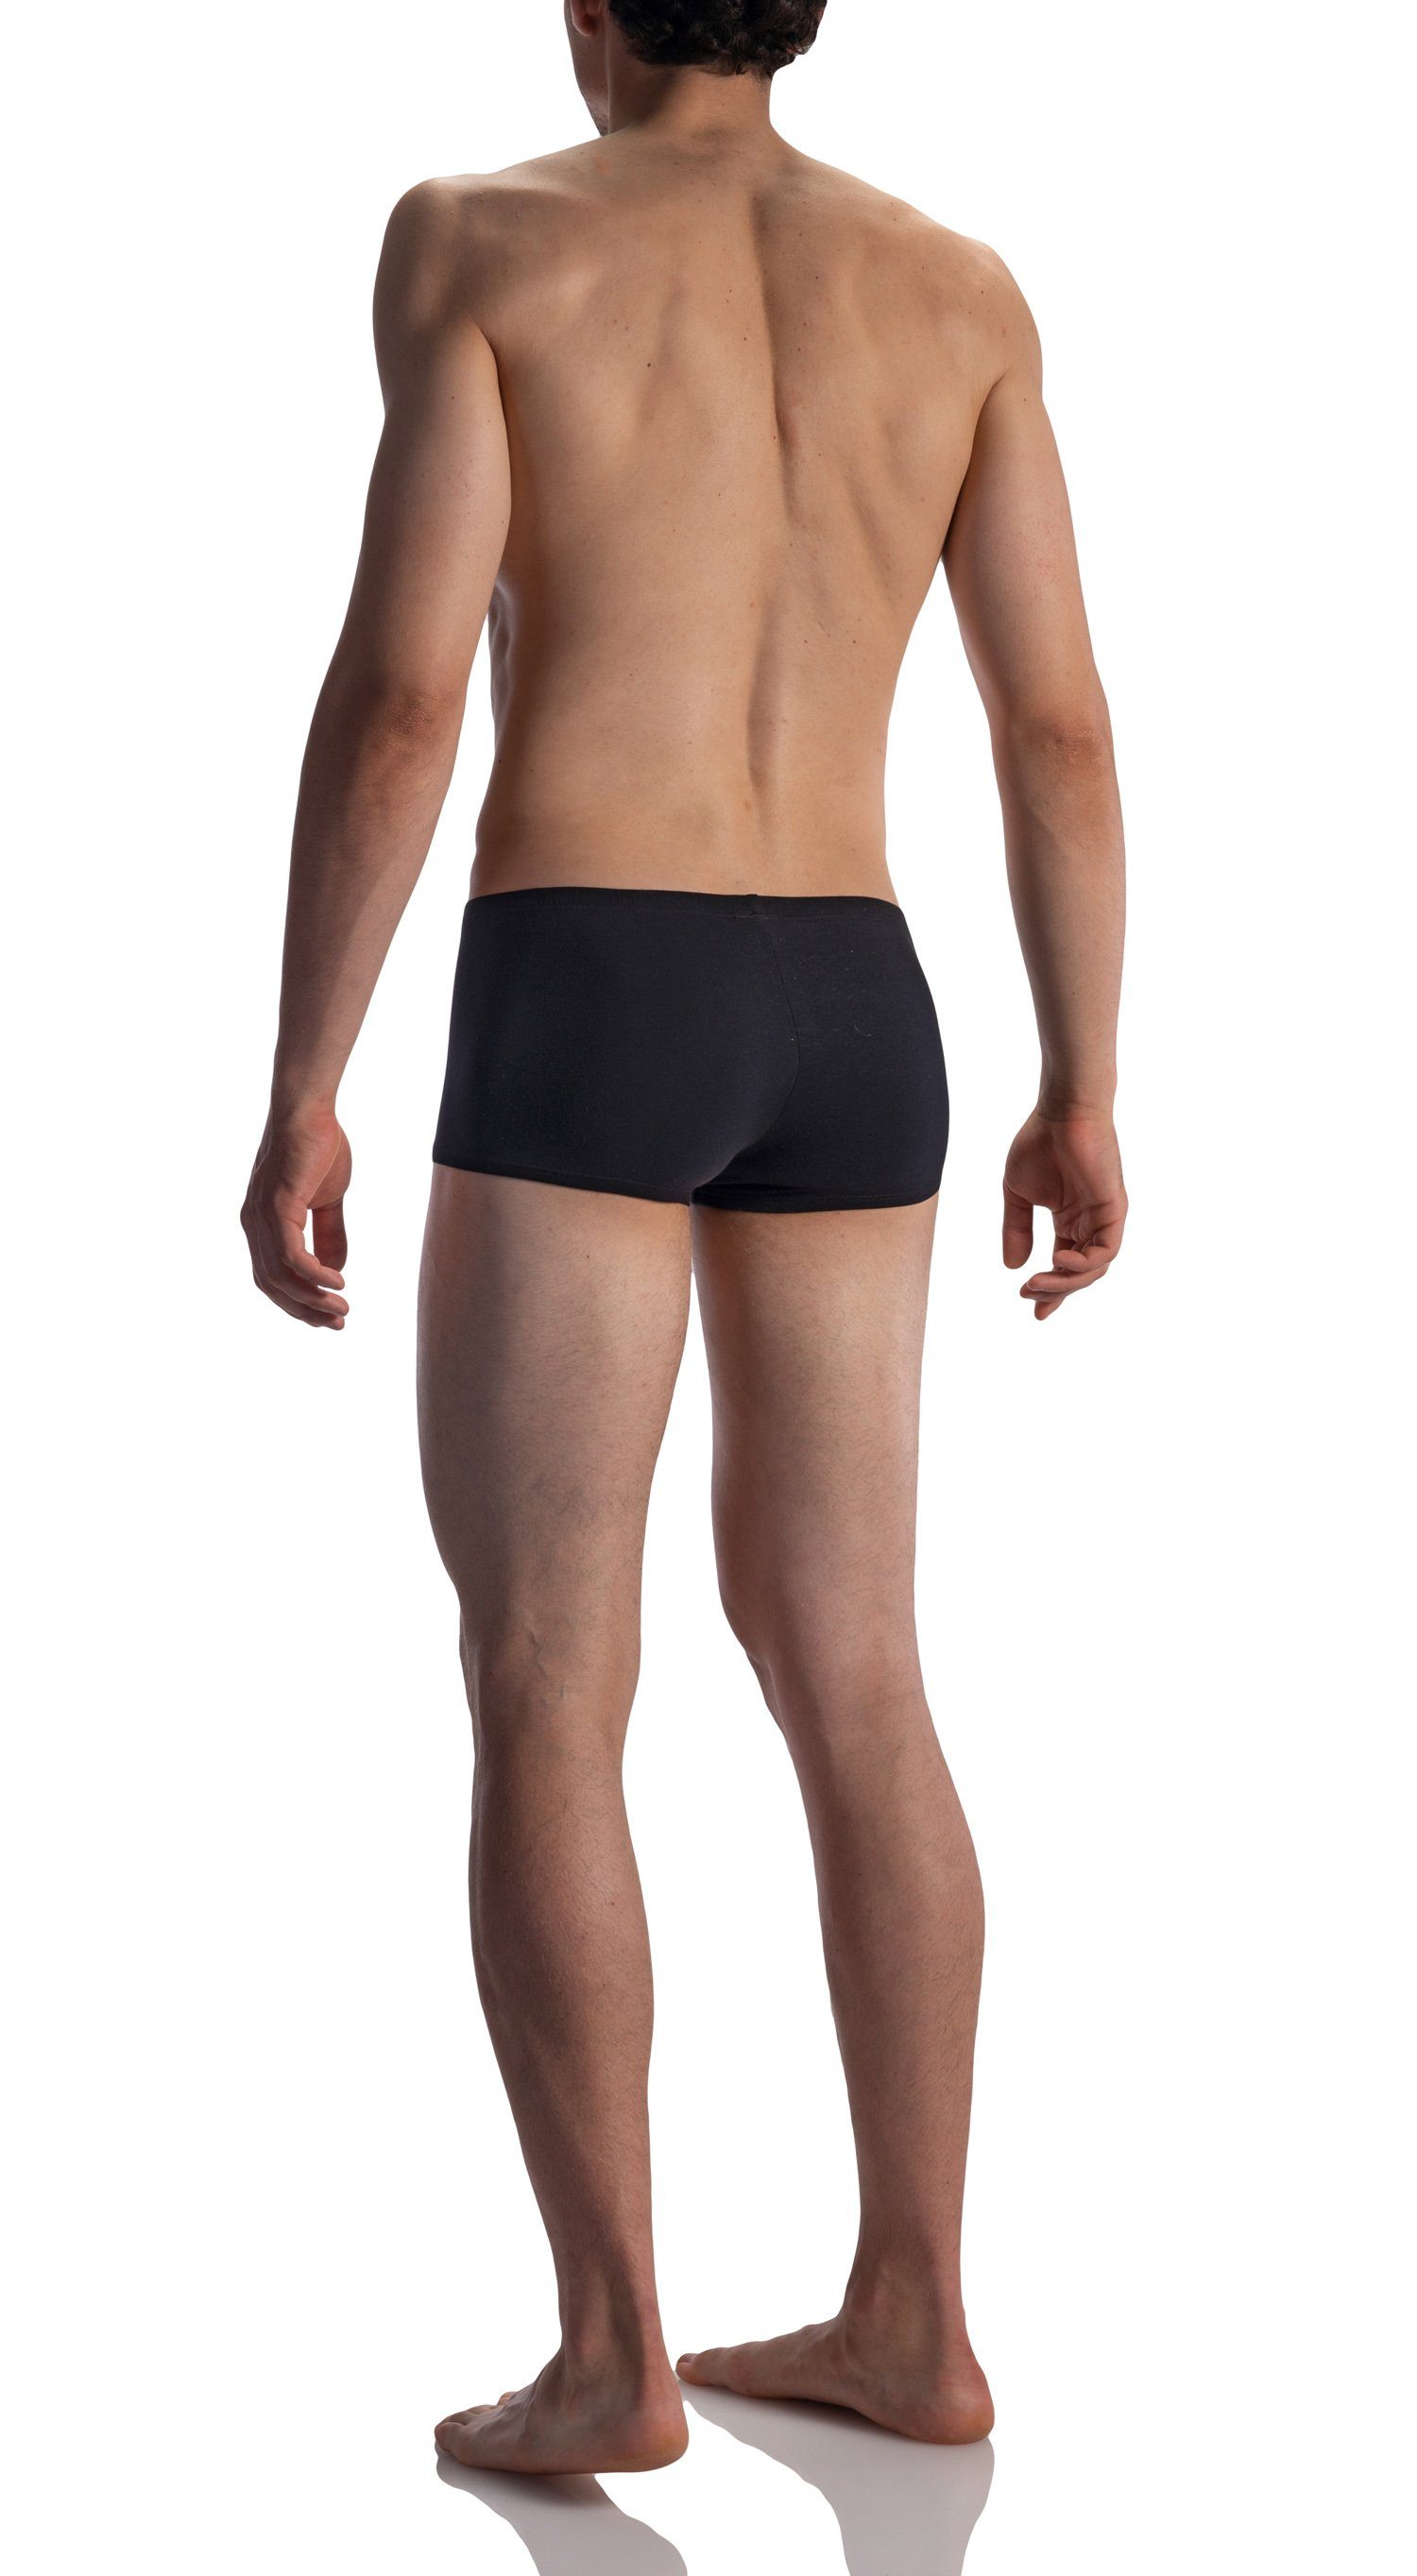 Olaf Benz Doppelpack 2er-Pack) Schwarz Olaf Minipants 1601 Boxershorts (Packung, Benz RED